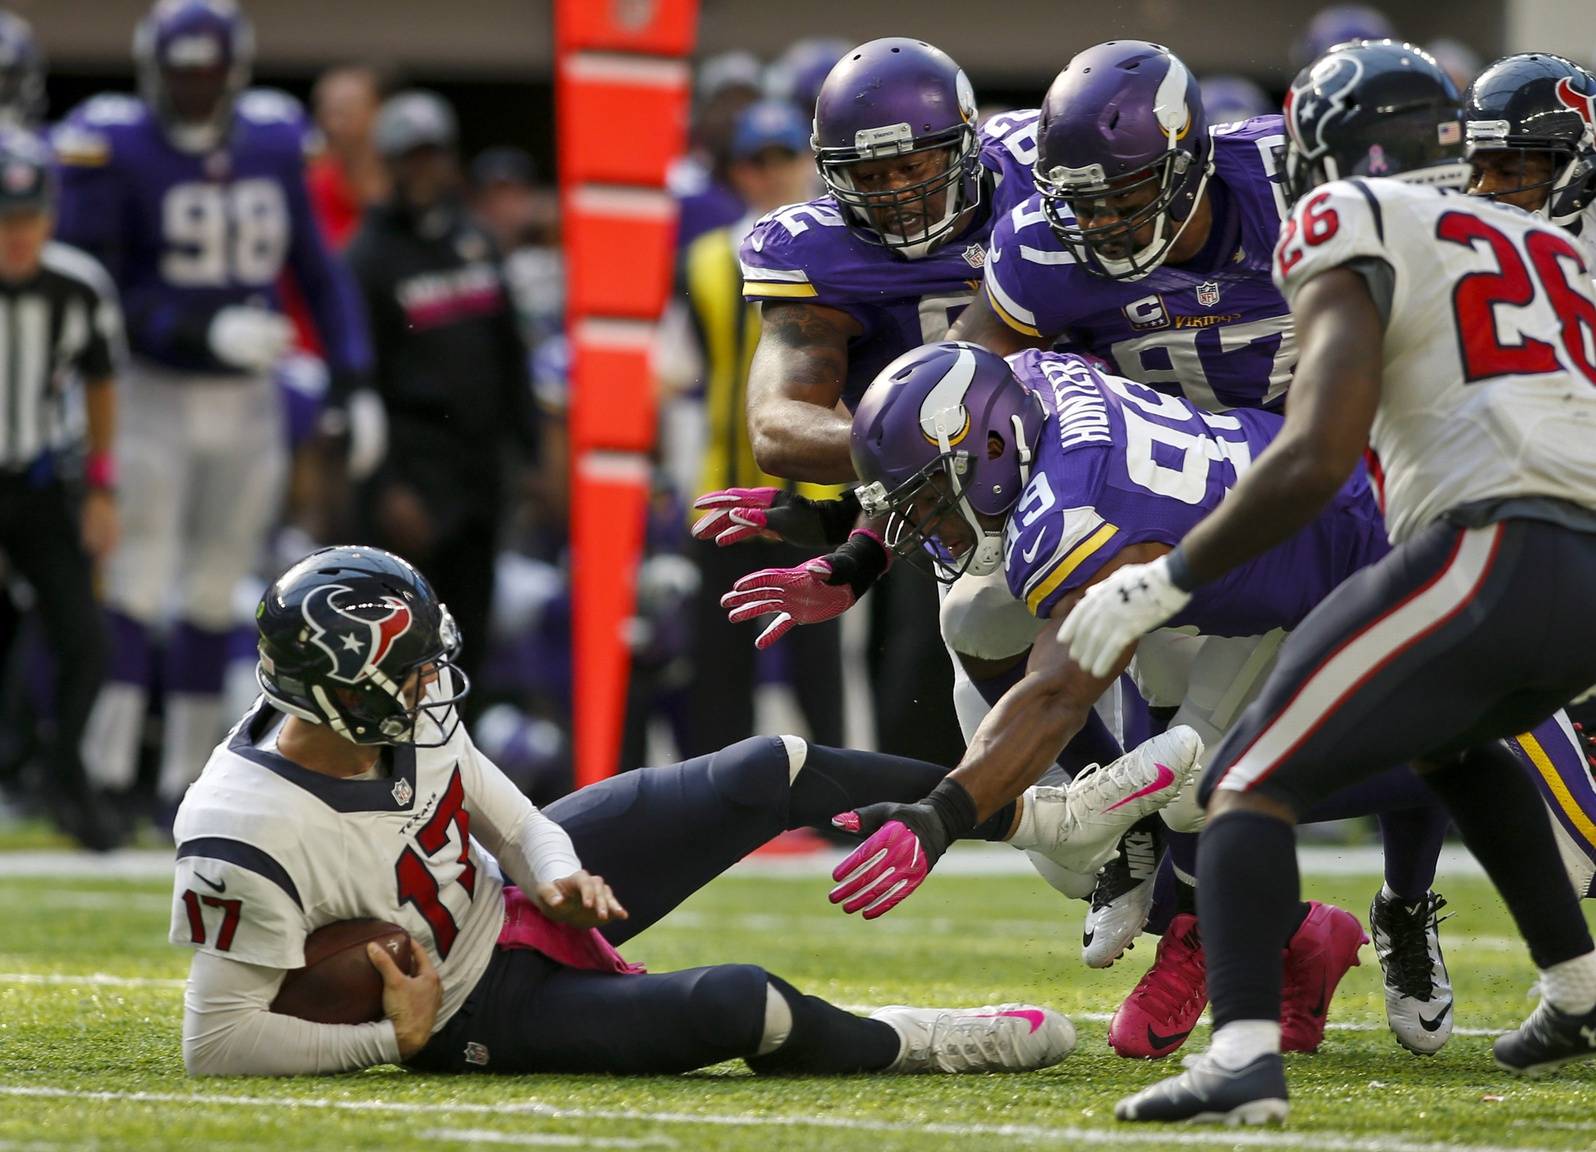 Oct 9, 2016; Minneapolis, MN, USA; Minnesota Vikings defensive tackle Tom Johnson (92) and defensive end Everson Griffen (97) and defensive end Danielle Hunter (99) force Houston Texans quarterback Brock Osweiler (17) to the ground for a loss in the fourth quarter at U.S. Bank Stadium. The Vikings win 31-13.